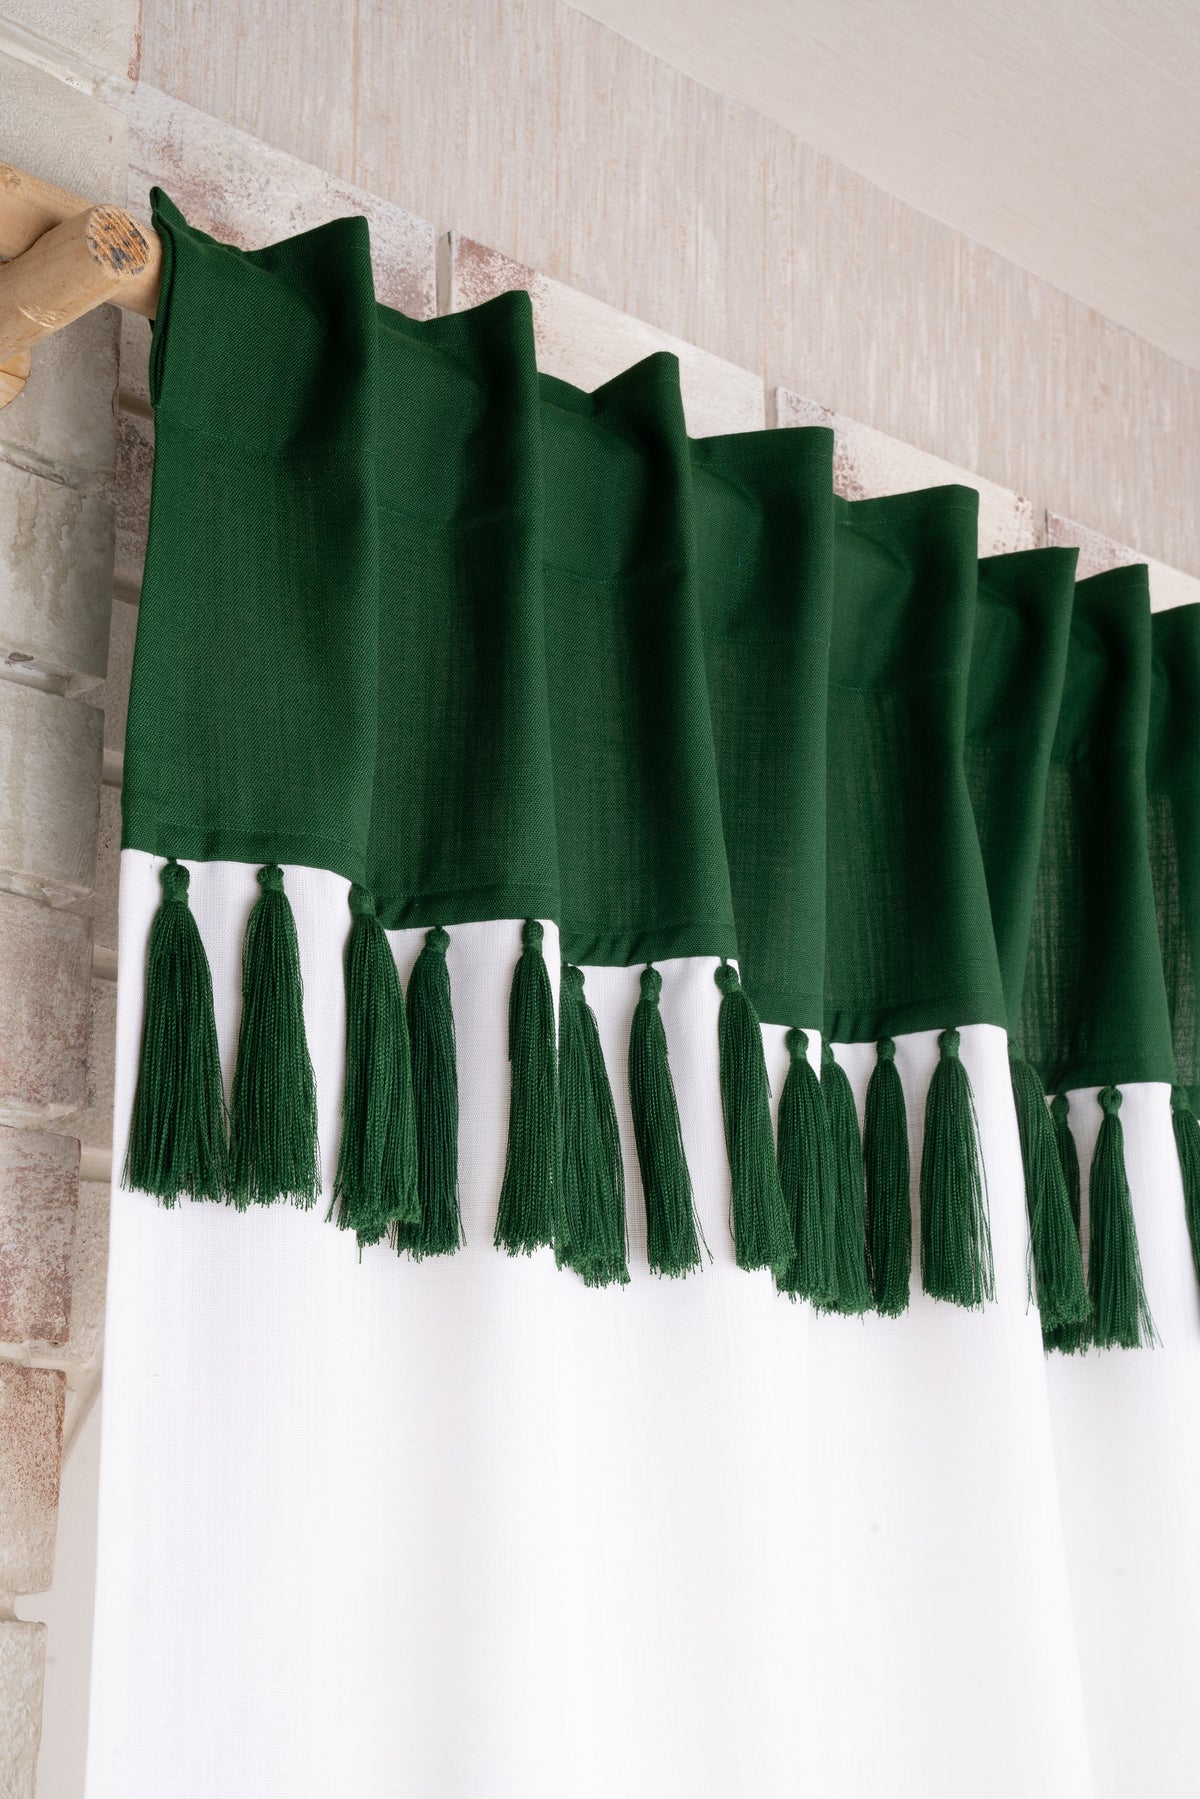 White and Green Linen Look Tassel Curtains | 1 Panel